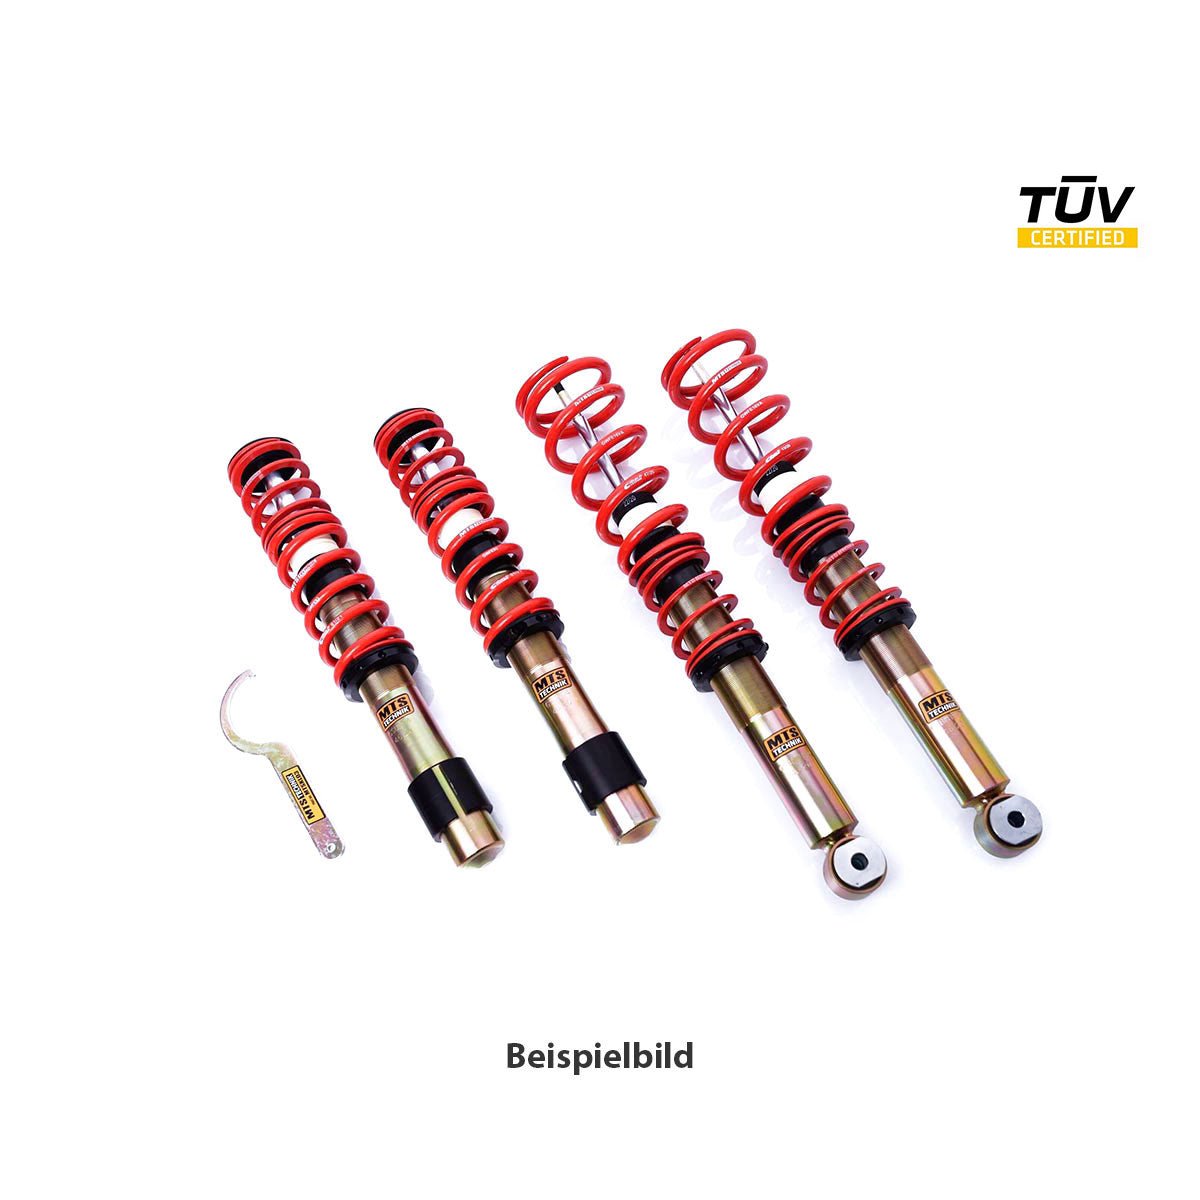 MTS TECHNIK coilover kit SPORT BMW E23 (with TÜV) - PARTS33 GmbH